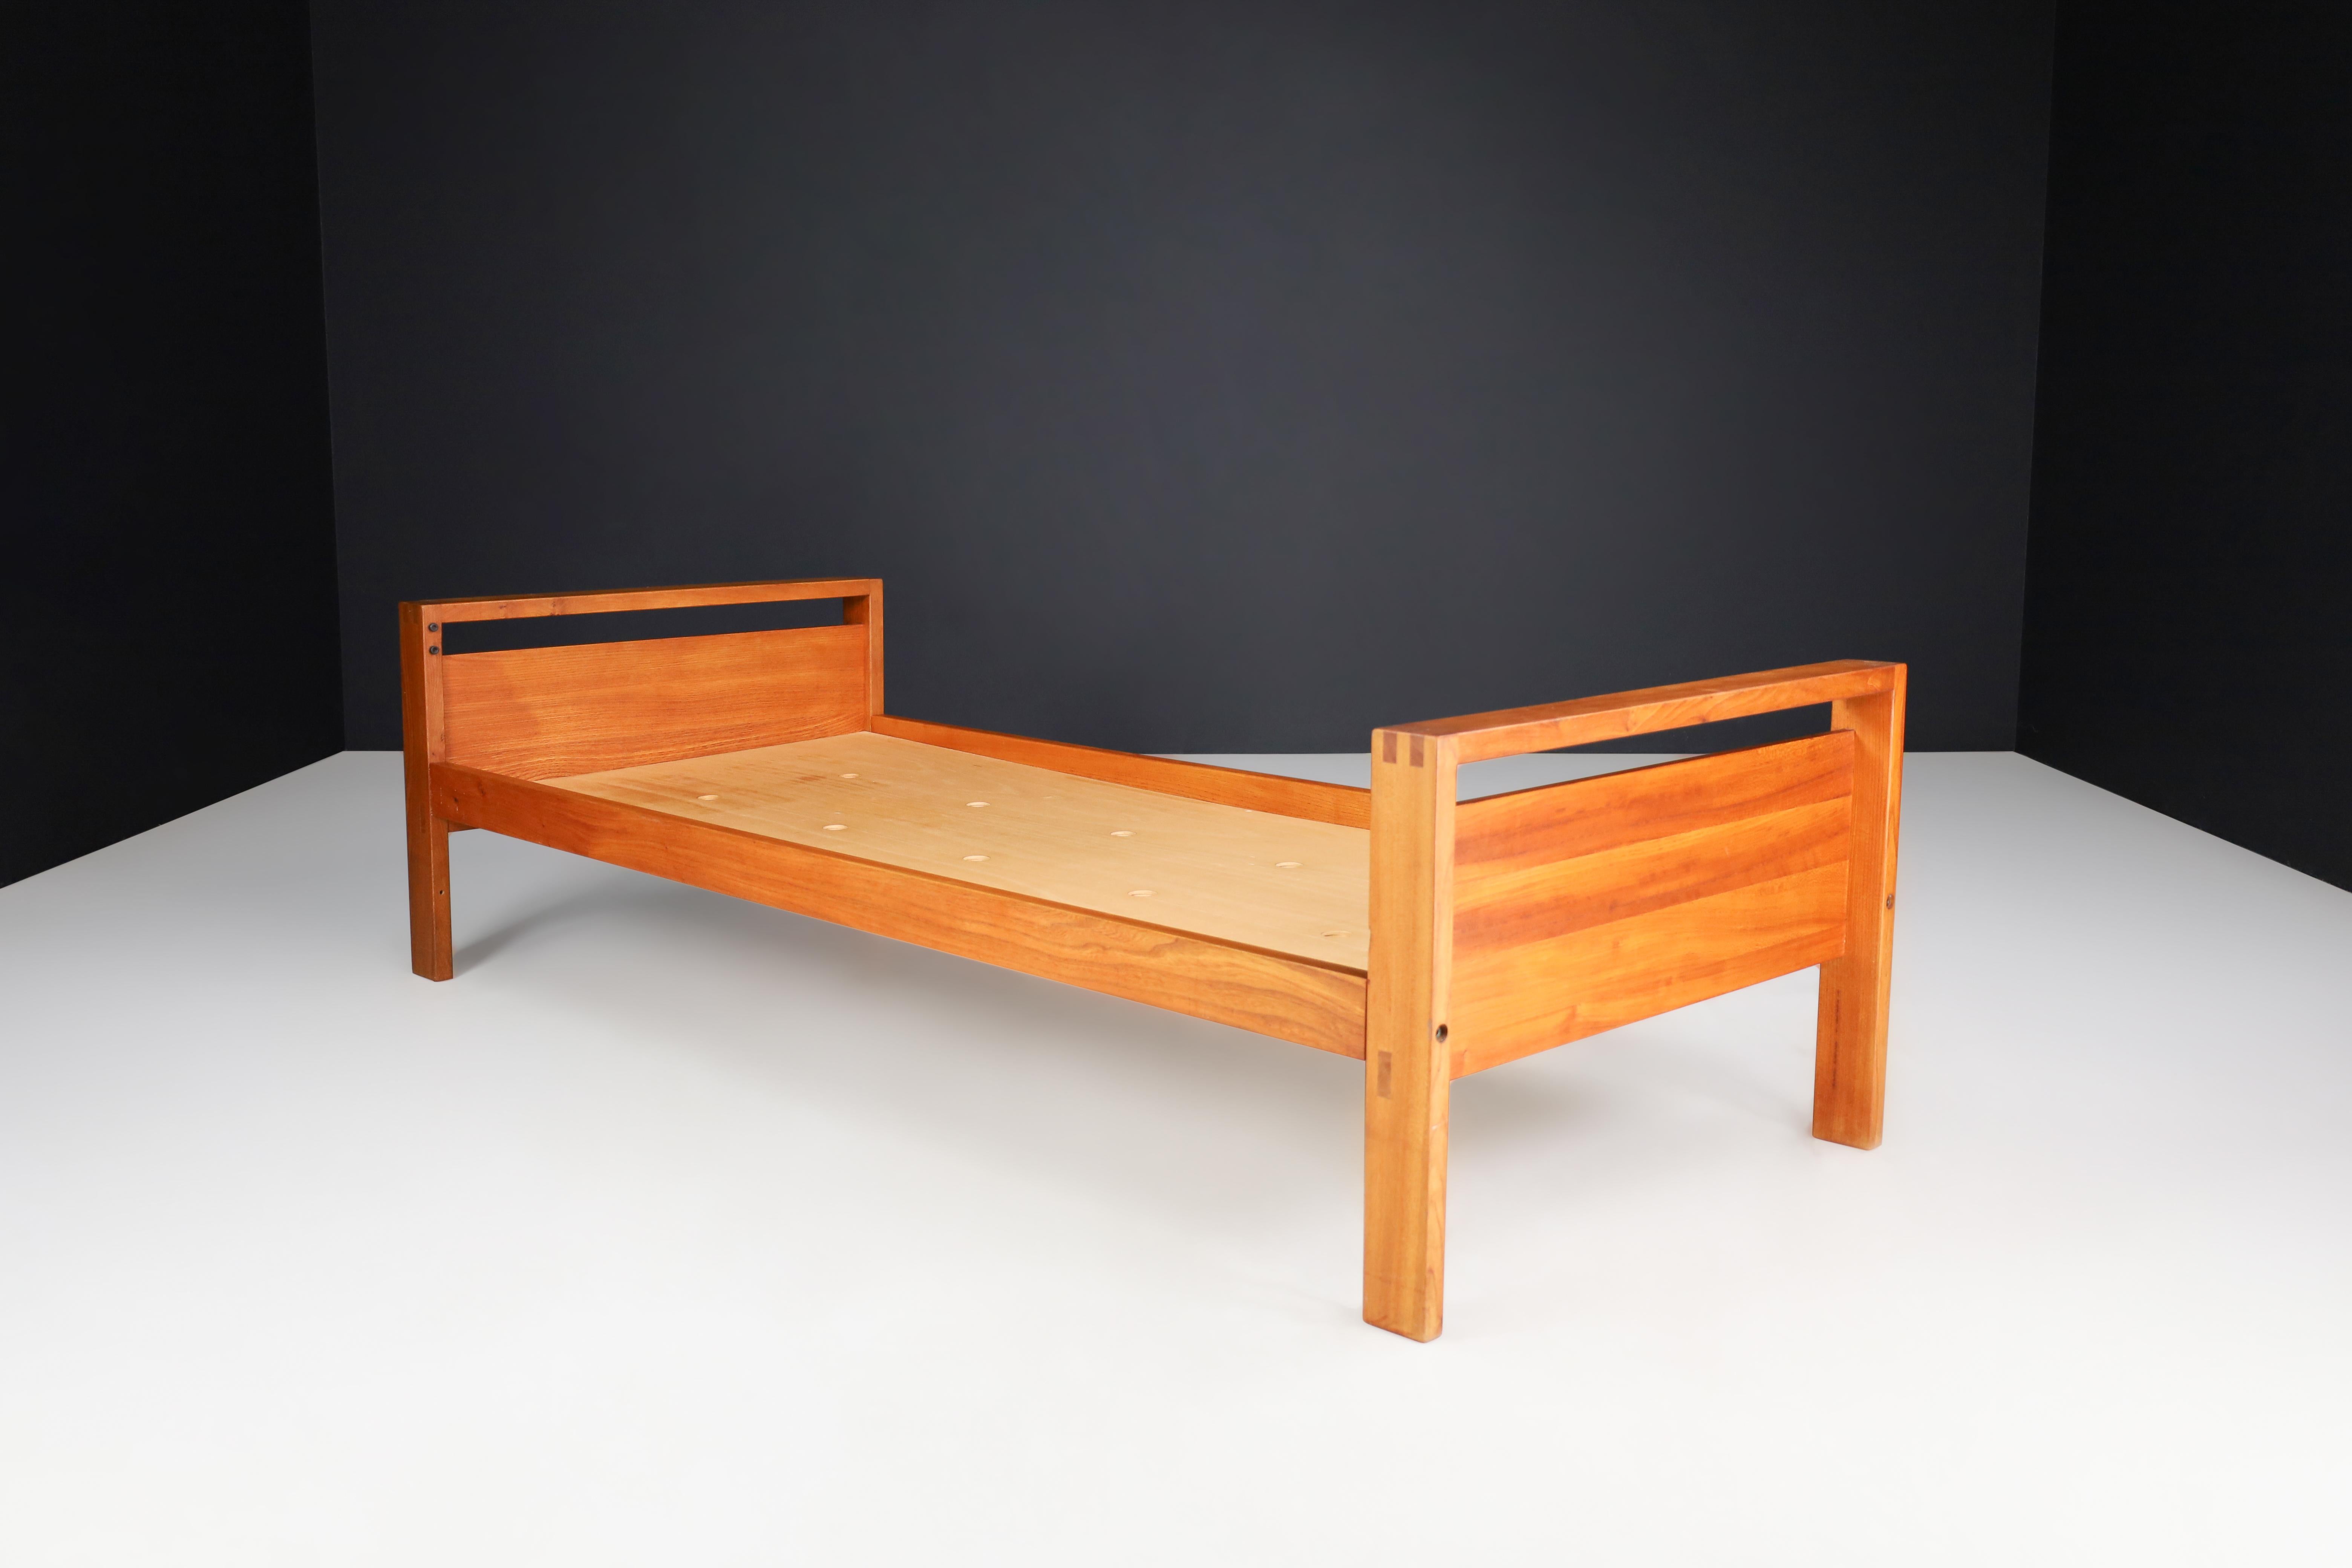 French Midcentury Pierre Chapo Lo6a Bed, Daybed in Solid Elm Wood, France, 1960s For Sale